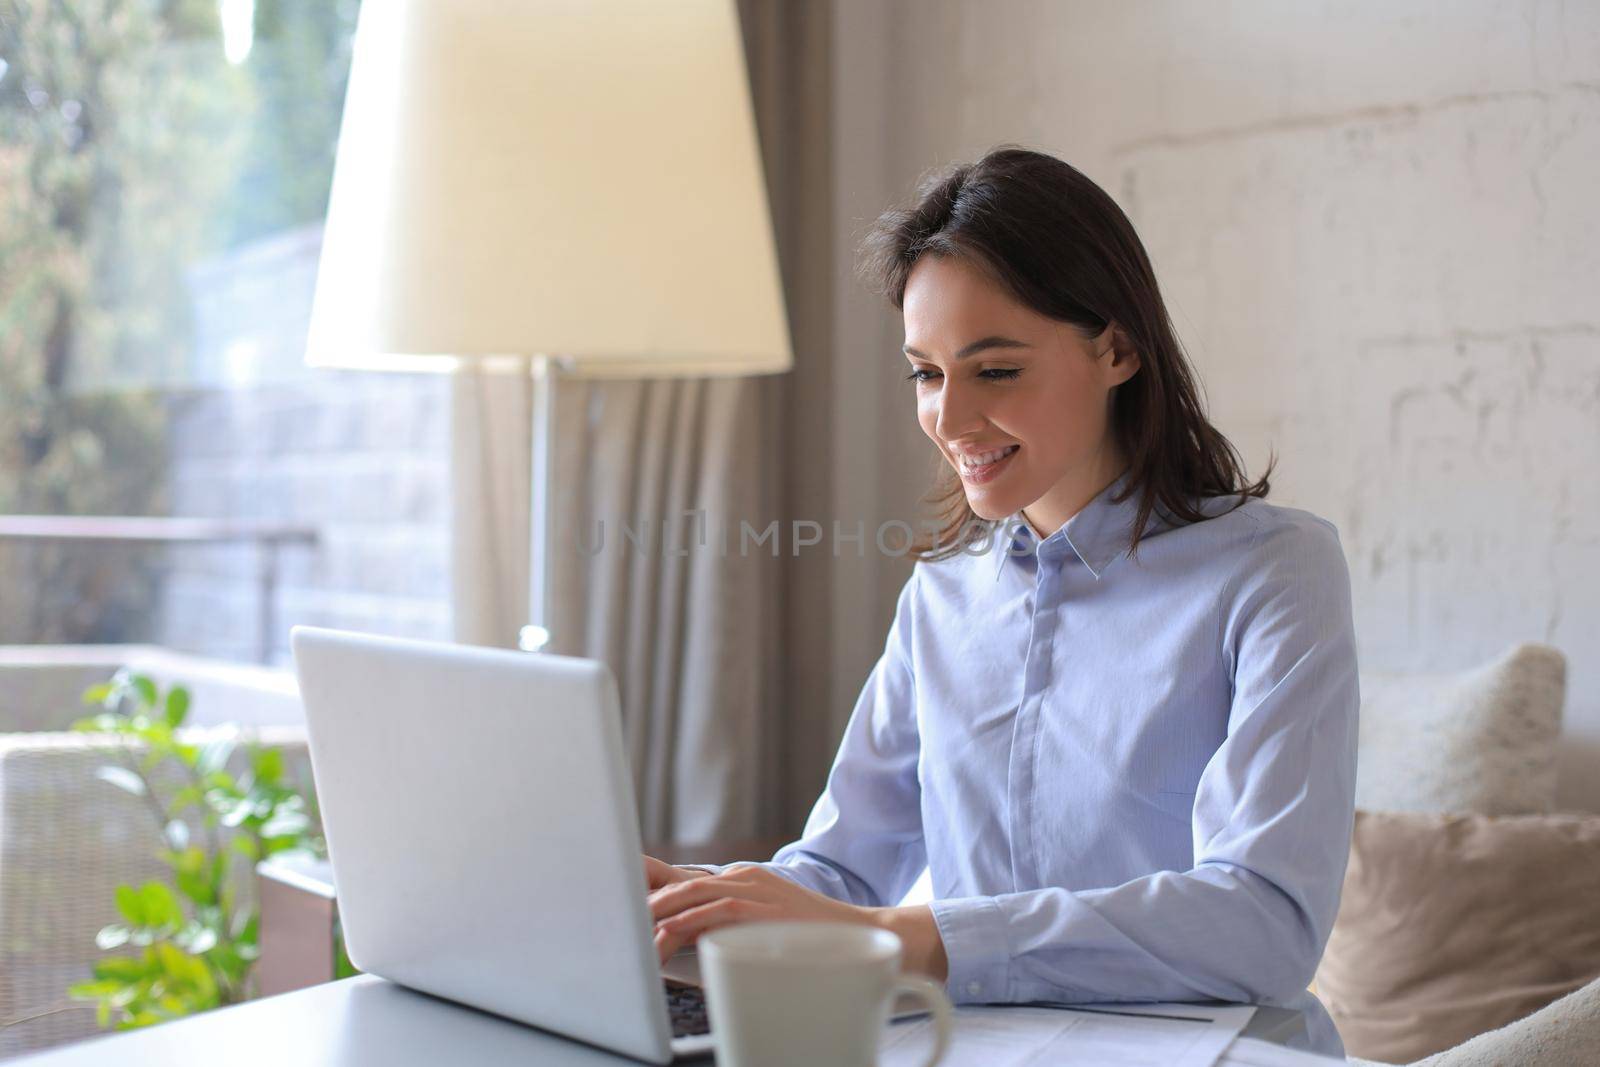 Smiling pretty woman sitting at table, looking at laptop screen. Happy entrepreneur reading message email with good news, chatting with clients online